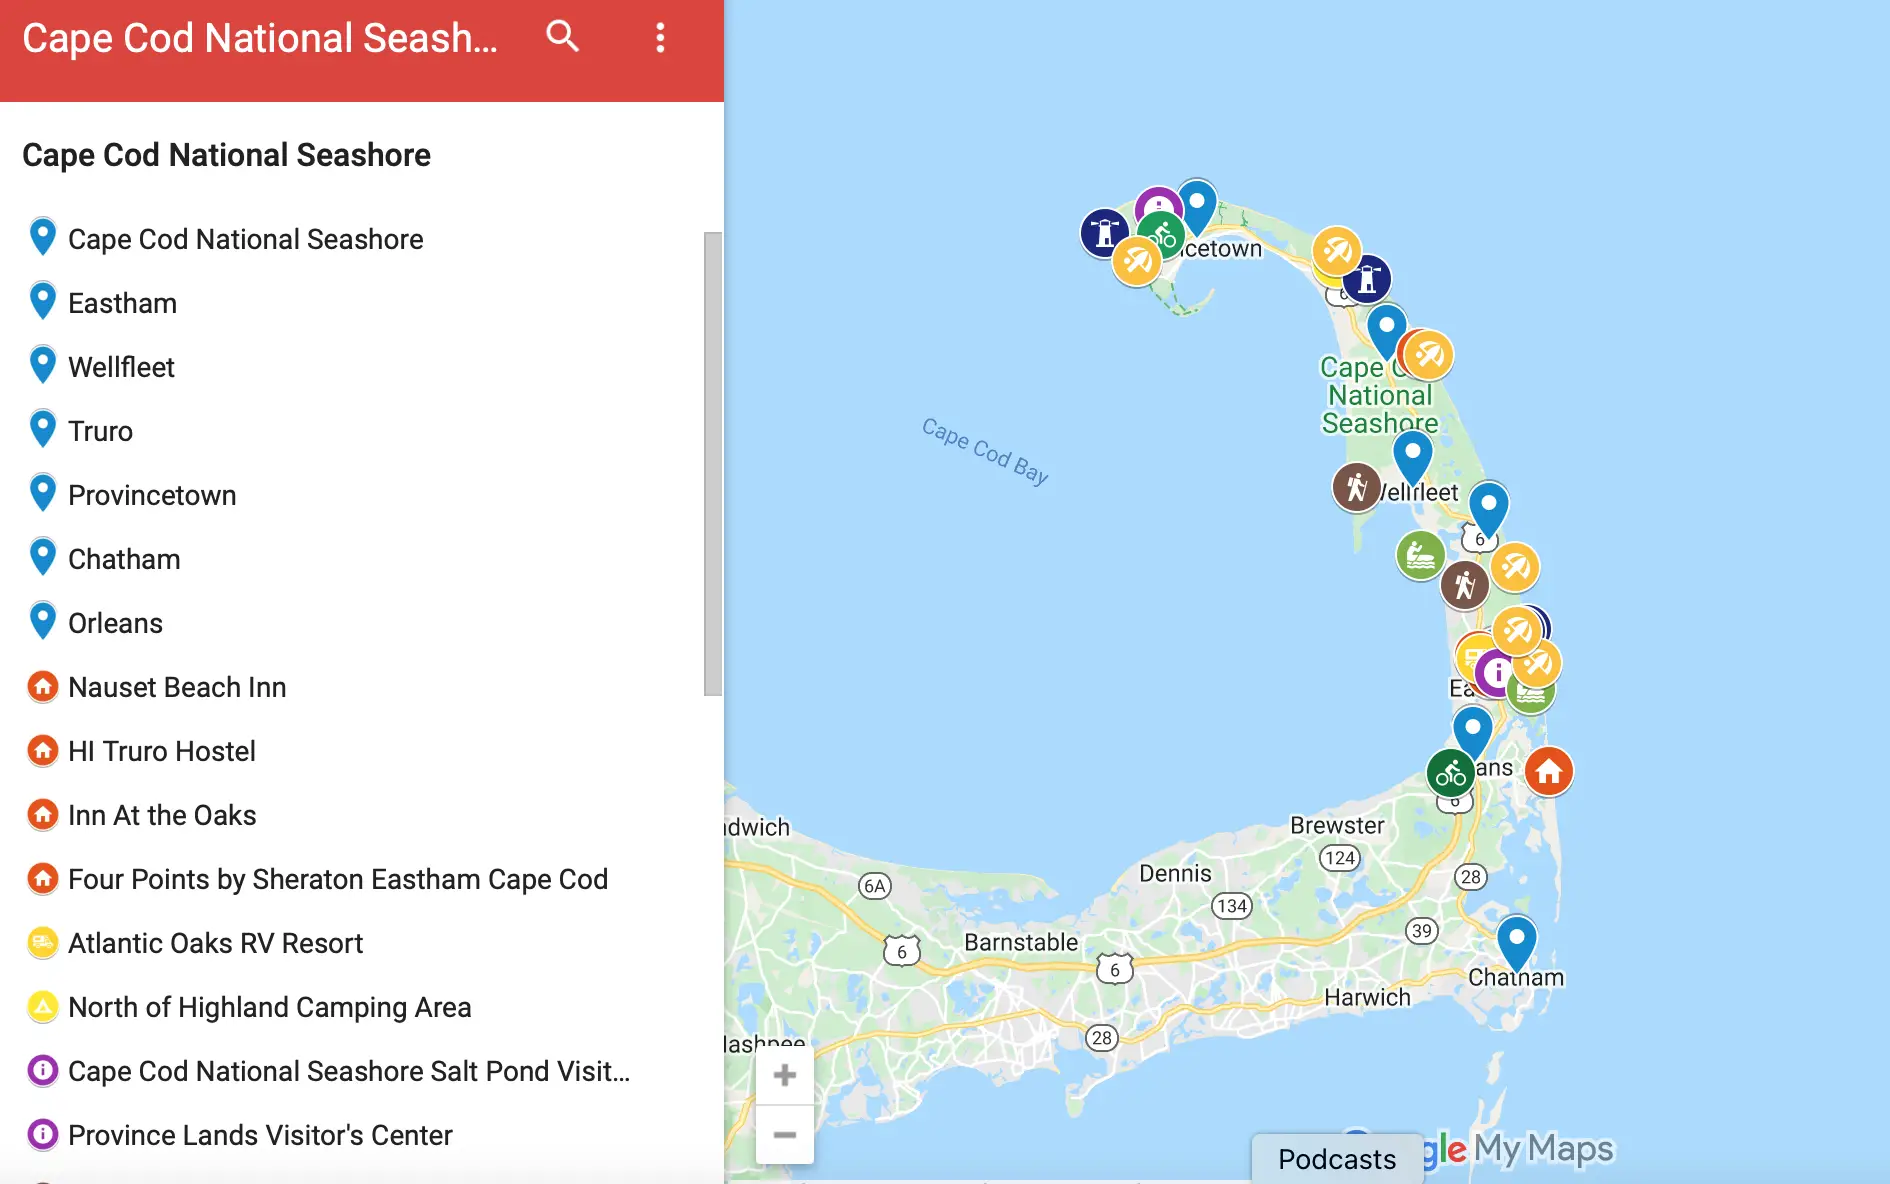 Map of things to do in the Cape Cod National Seashore offseason